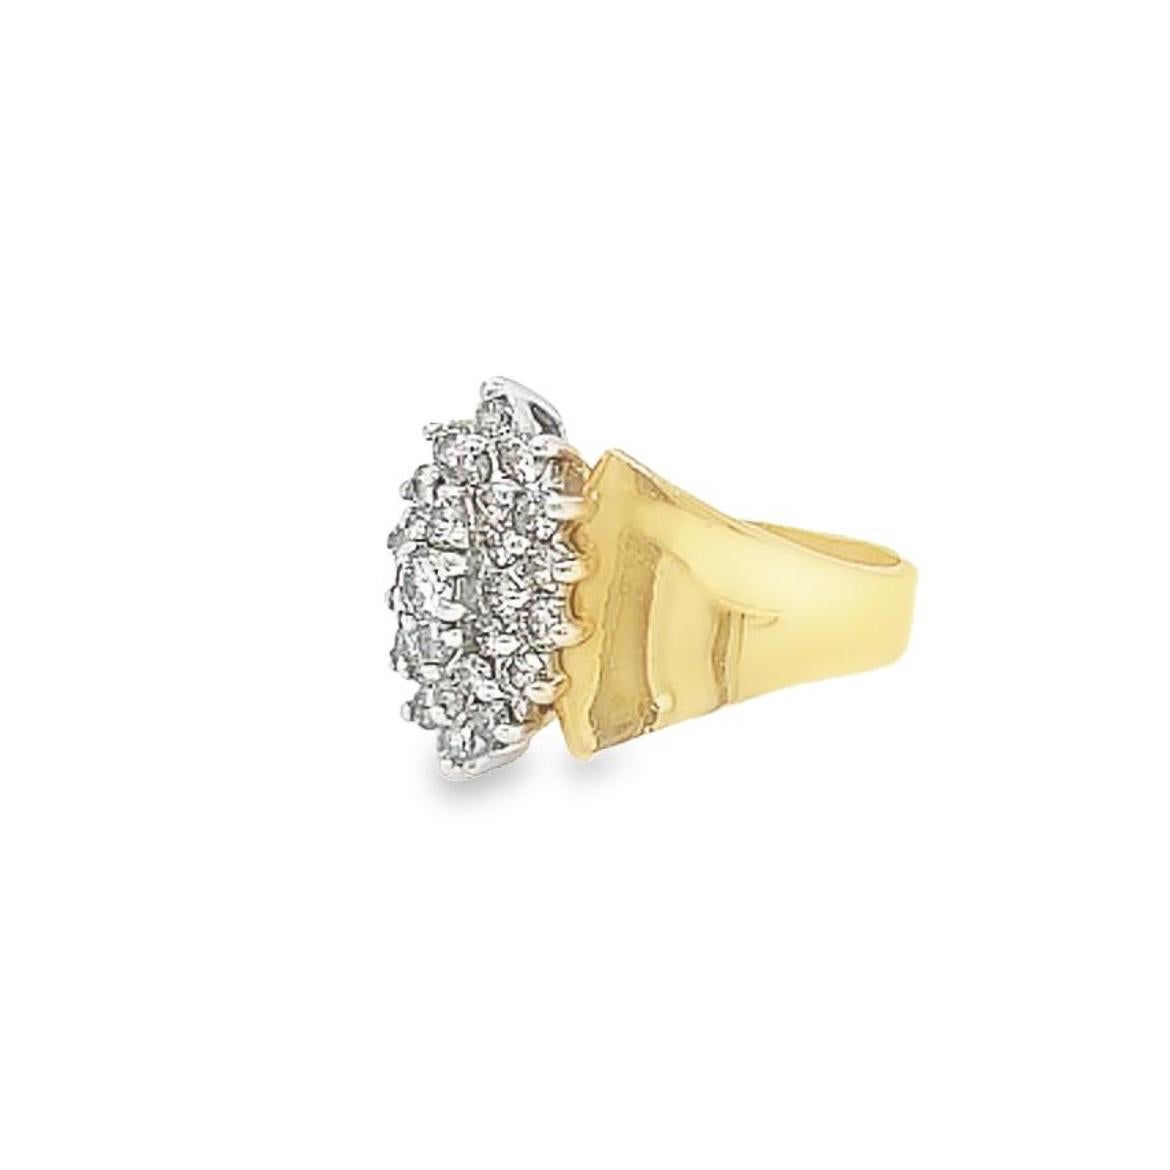 Glamorous, sophisticated, and completely unique, this ring makes a gorgeous statement. Vintage 14K yellow gold diamond cluster ring containing 29 round brilliant cut diamonds weighing approx. 2.58ctw. The diamonds are prong-set and curve upwards